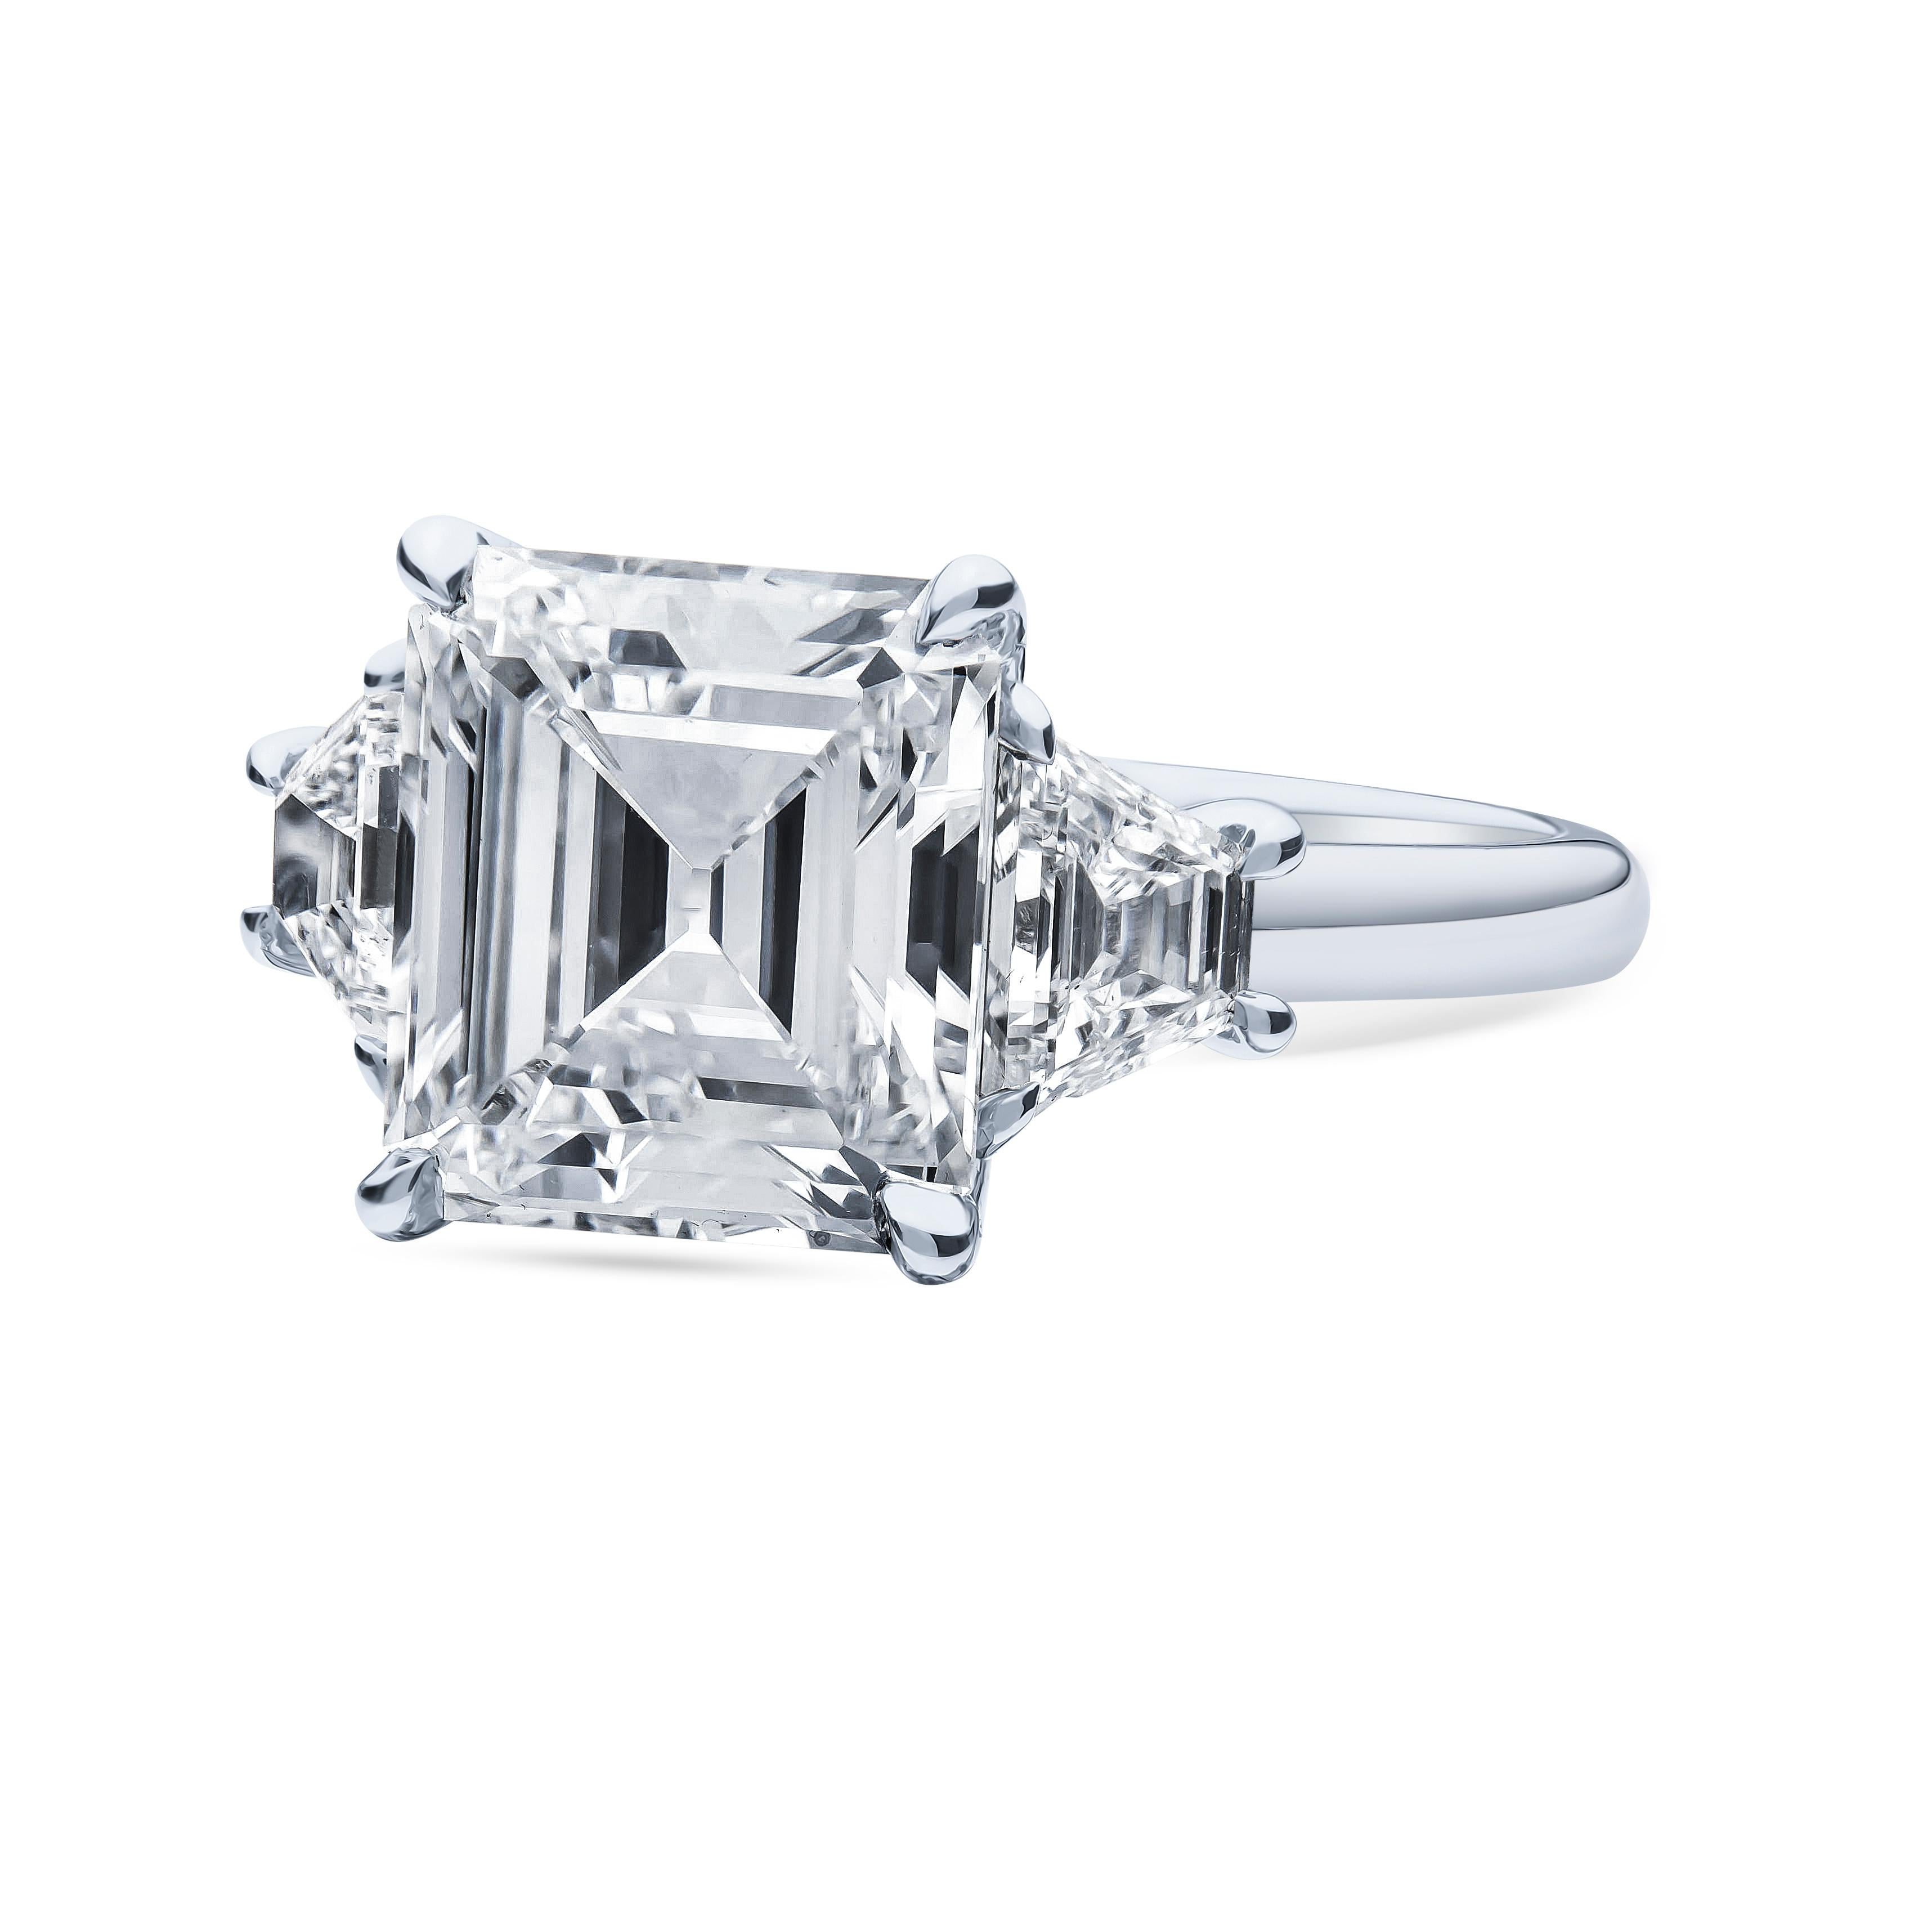 Captivating three-stone diamond showcasing a rare vintage 4.00ct square emerald cut natural diamond, D color, VVS1 clarity, designed in platinum. The side diamonds are perfectly matched trapezoid cuts weighing 0.90 carats total with F-G color,